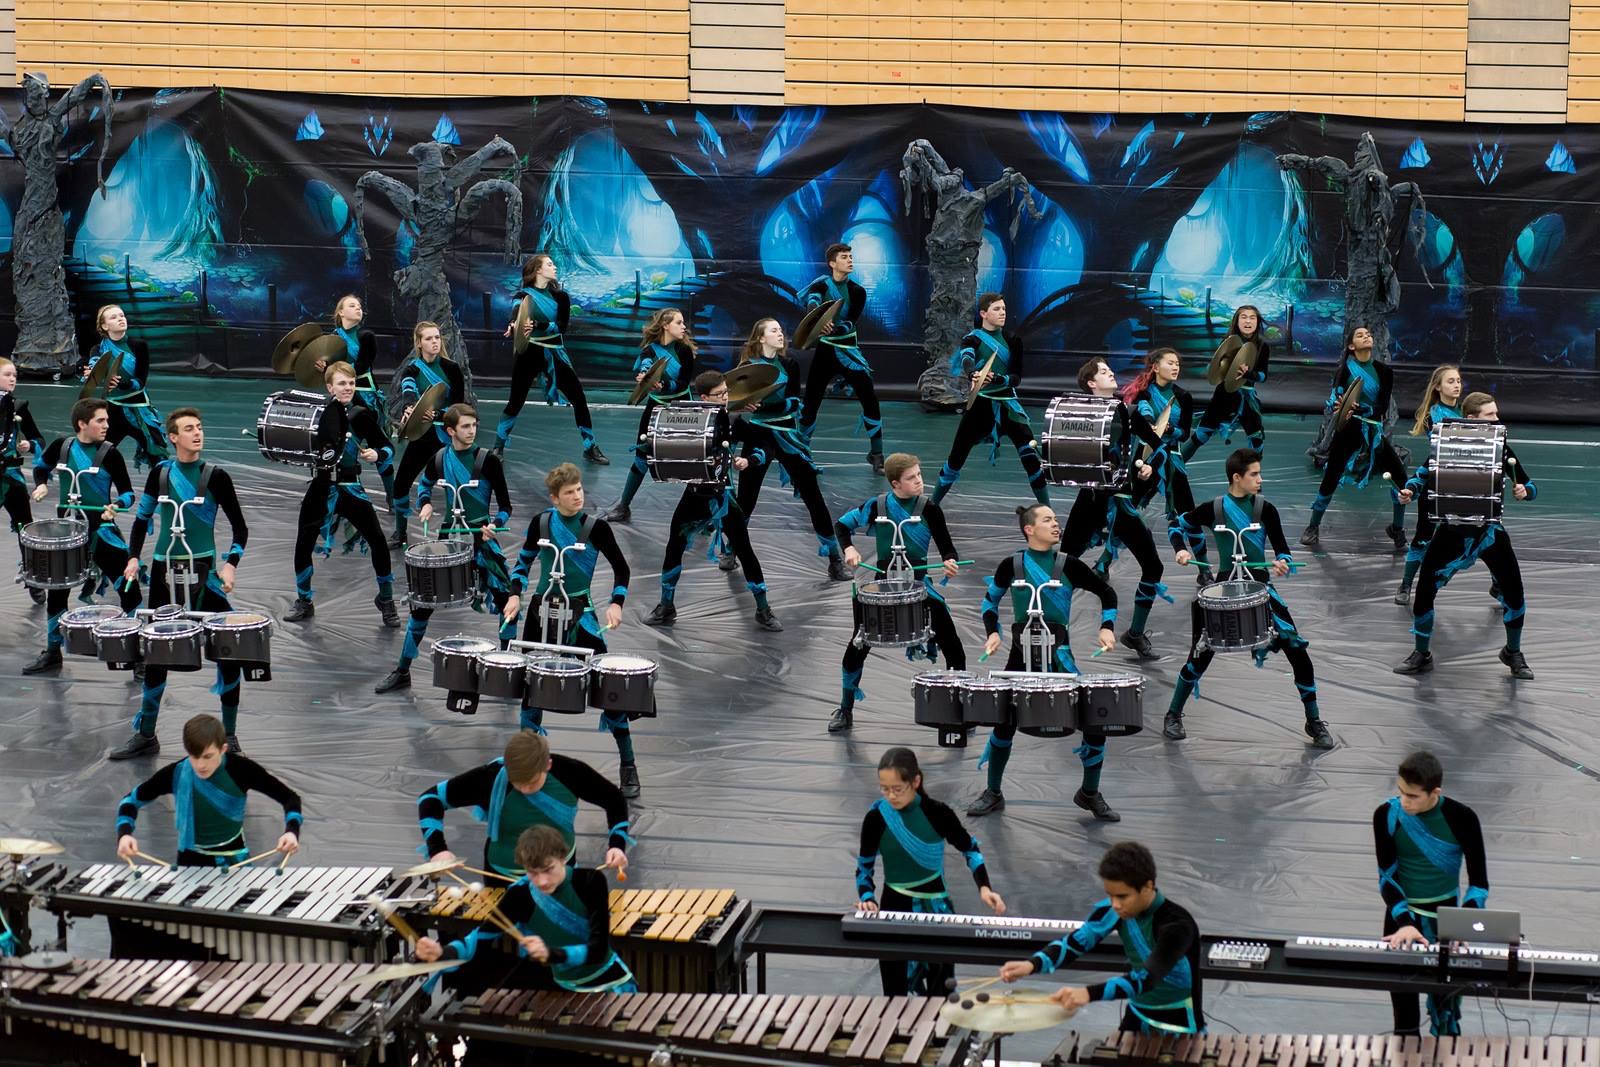 2017 Winter Percussion at Greenfield – 3/4/17